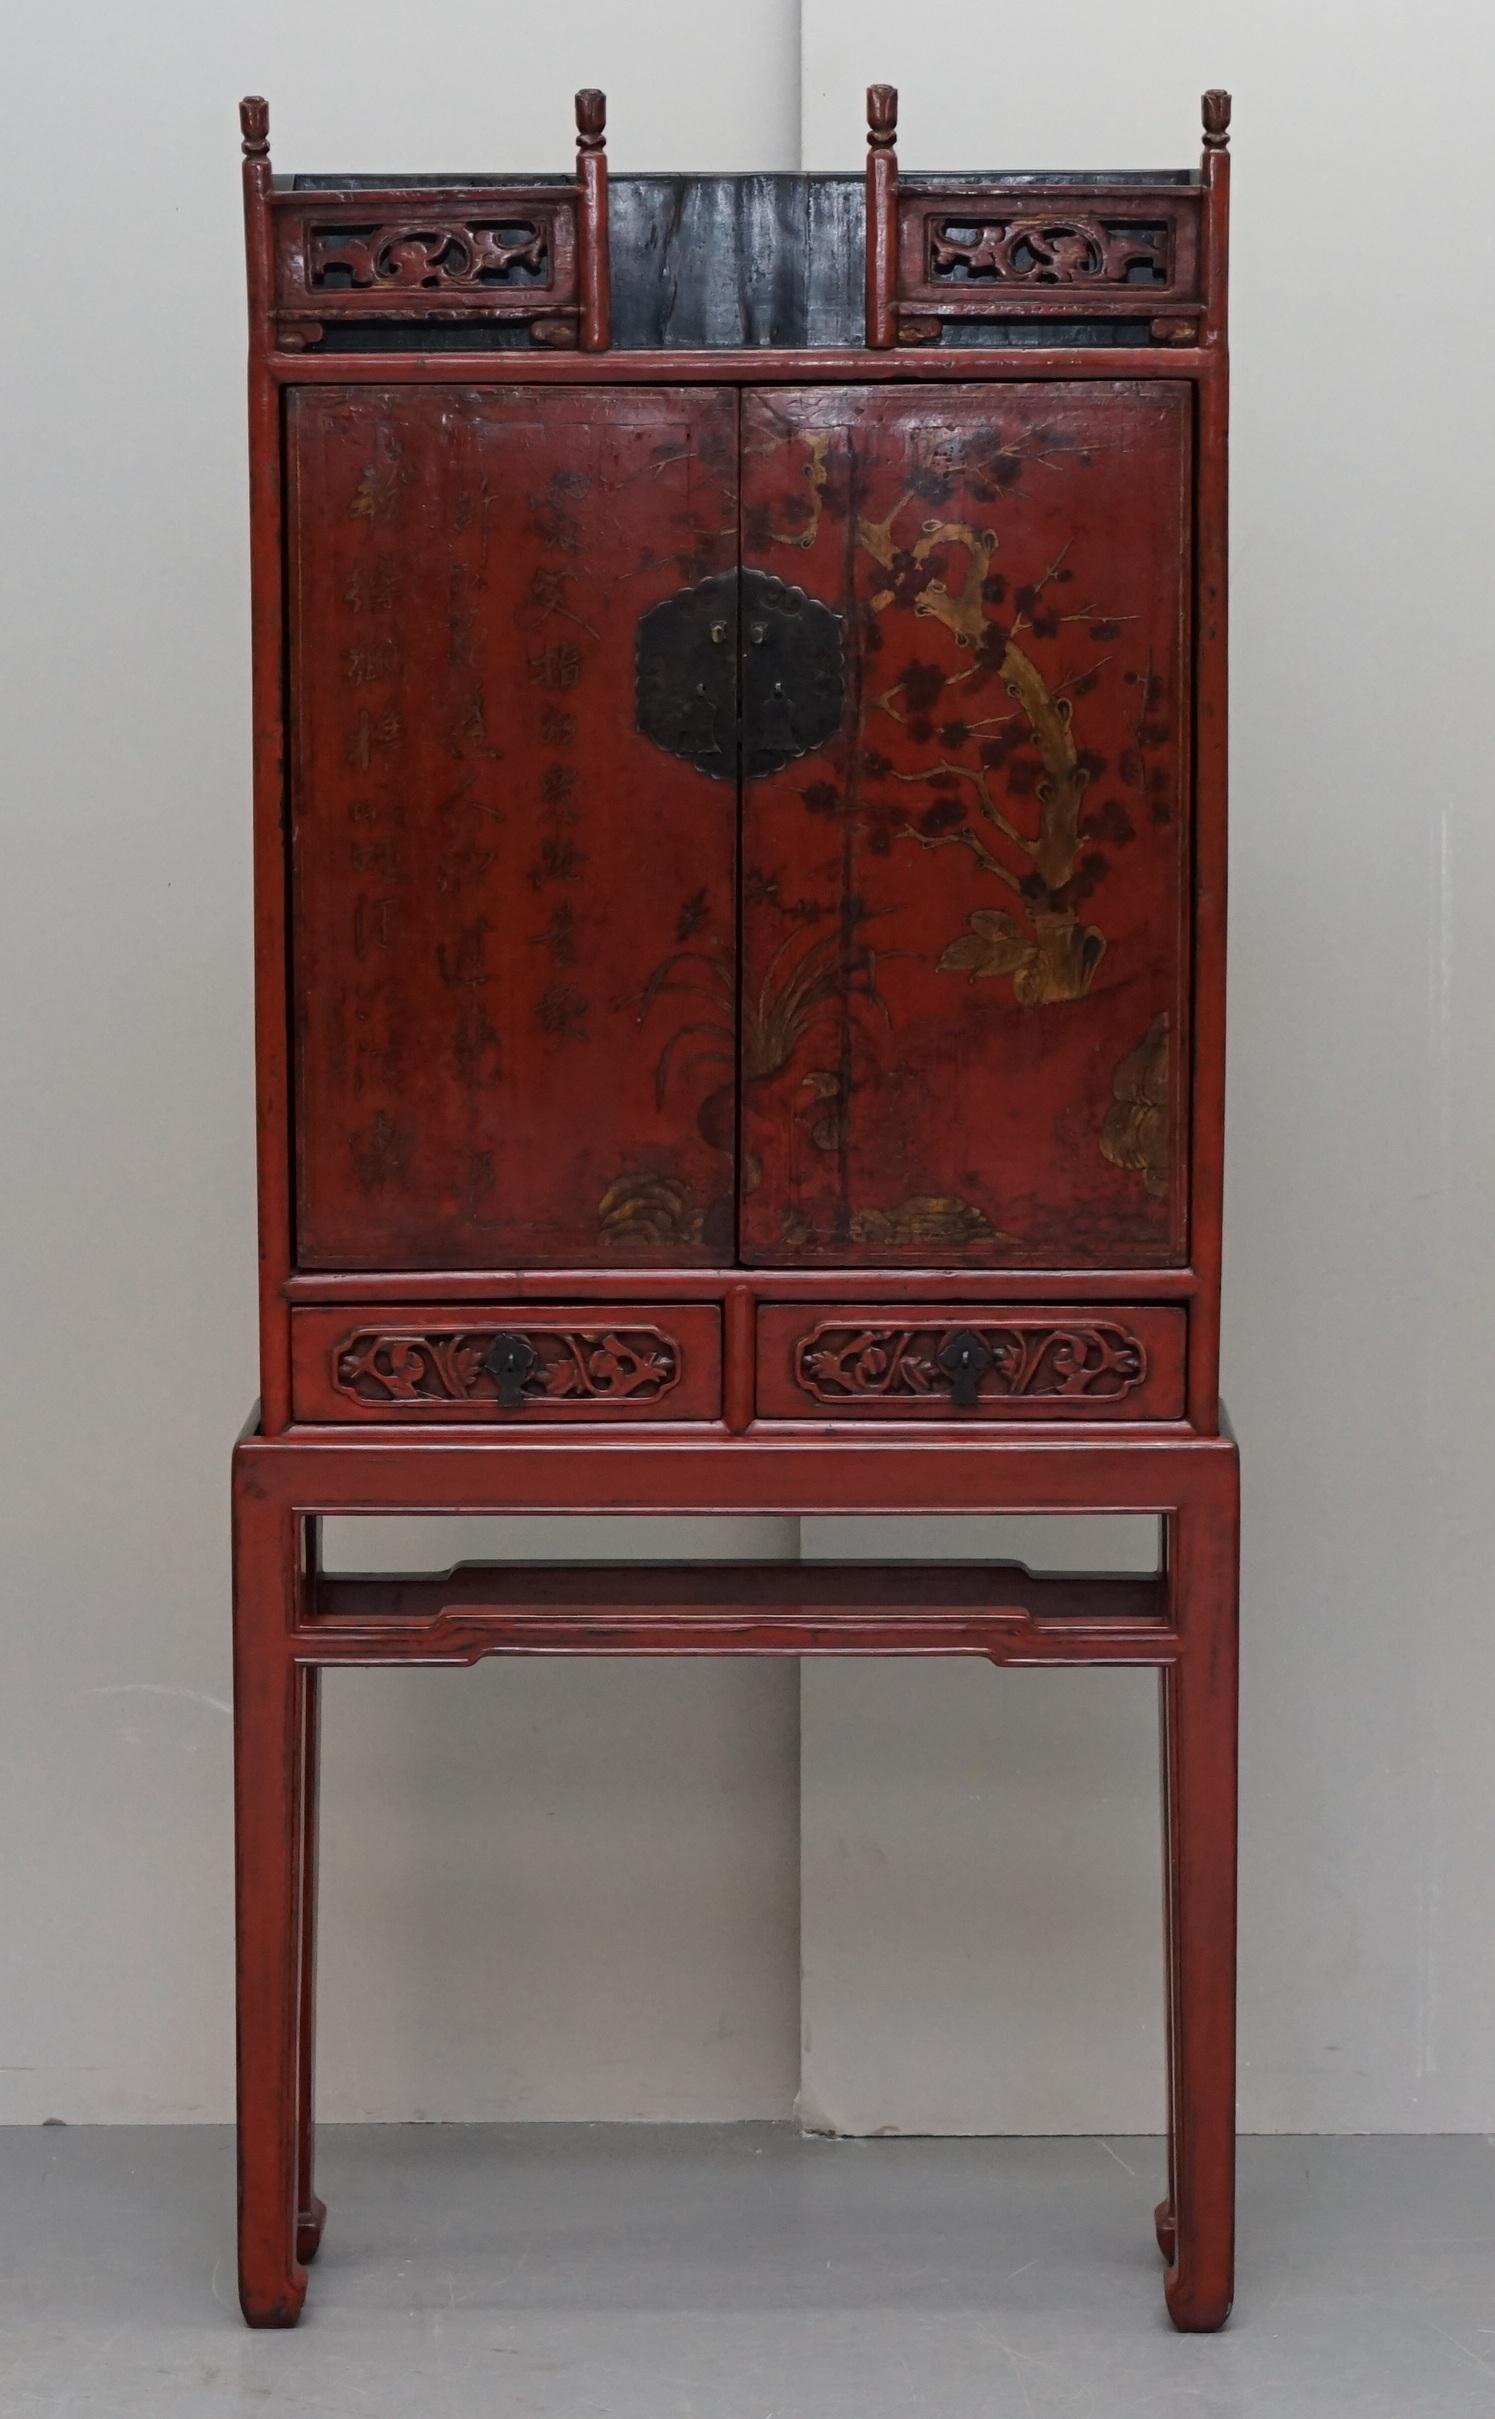 We are delighted to offer for sale this exquisite and exceptionally rare 19th century Chinese red lacquer cabinet on stand

A good looking and decorative piece, this is circa 1860-1880, hand painted and lacquered with multiple layers to the finish.